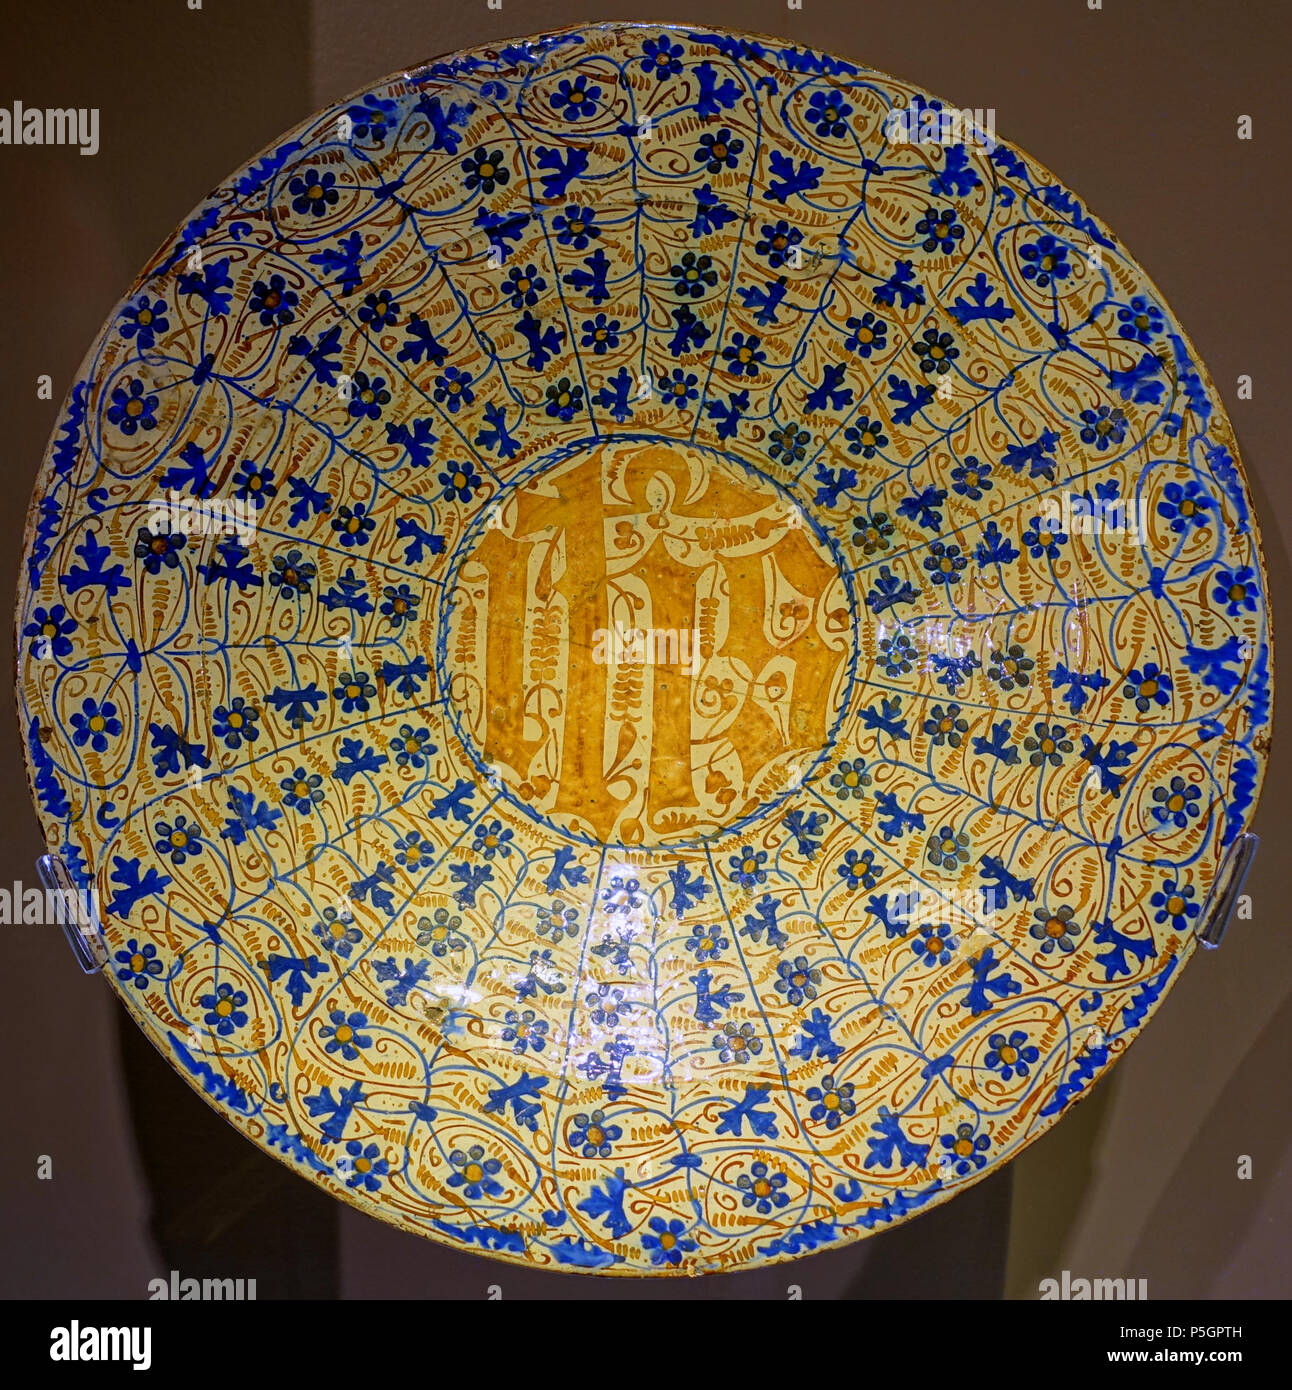 N/A. English: Exhibit in the Montreal Museum of Fine Arts - Montreal, Quebec, Canada. 28 September 2016, 13:15:30. Daderot 457 Dish, Spain, Manises, c. 1430-1470, earthenware, underglaze blue, overglaze lustre, opaque glaze - Montreal Museum of Fine Arts - Montreal, Canada - DSC09733 Stock Photo